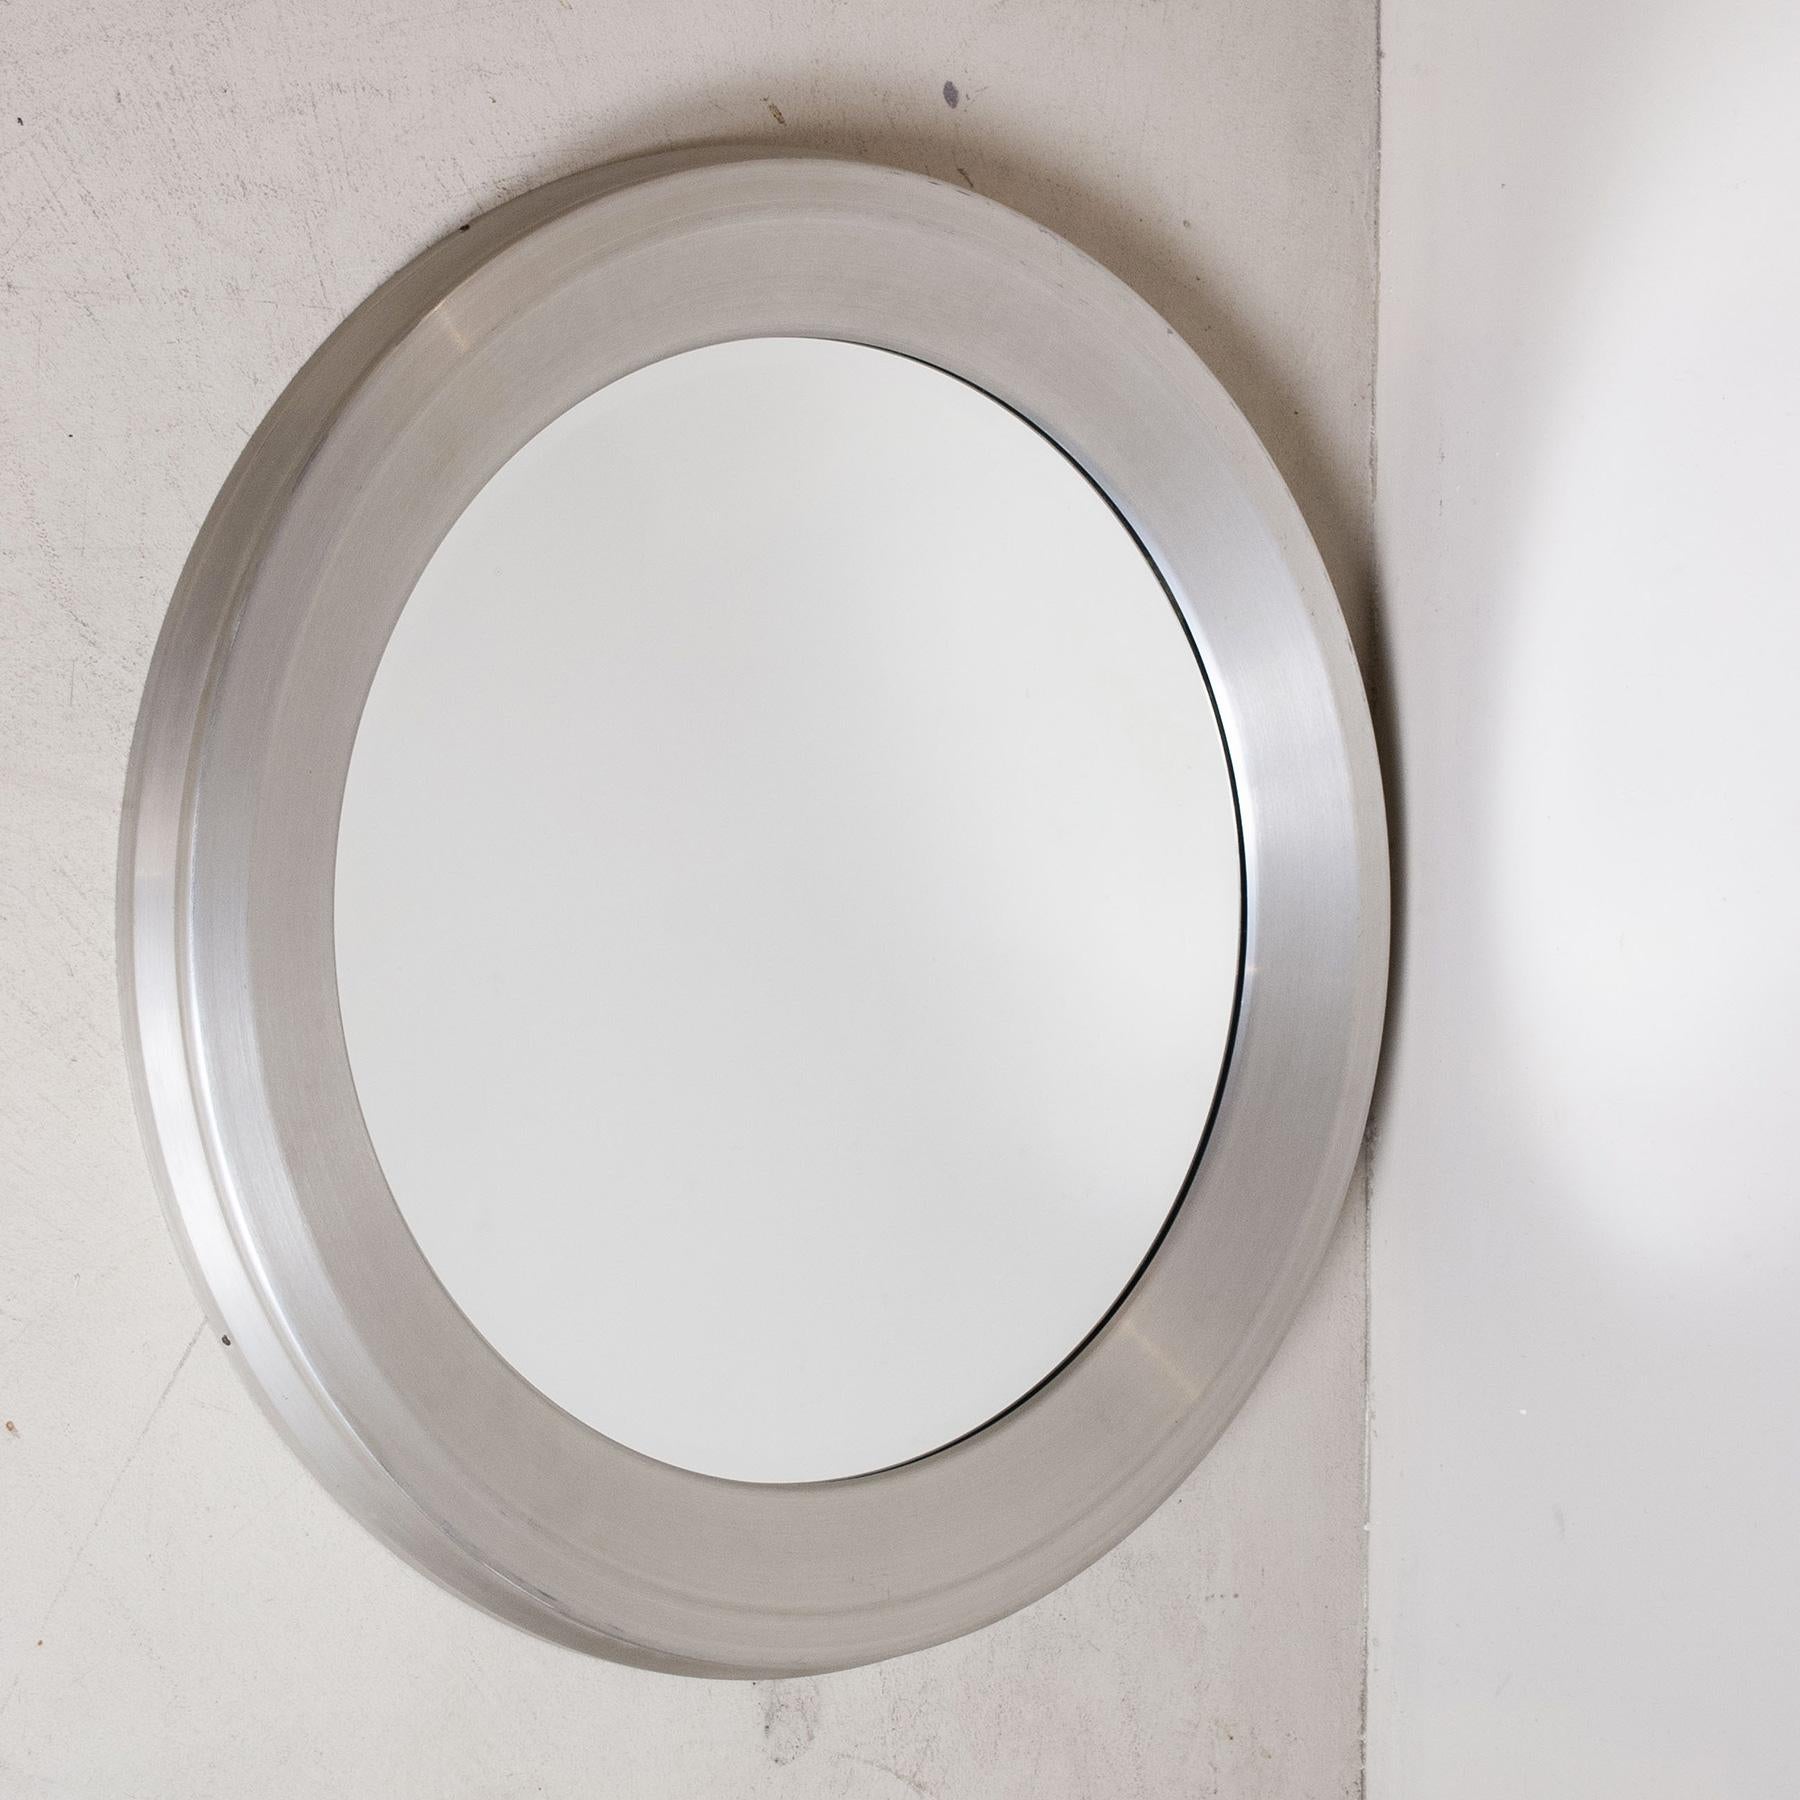 Round mirror with satin-finish aluminium frame and bevelled mirror model Narciso by Sergio Mazza for Artemide, late 1960s

Sergio Mazza is an Italian designer born in 1931 in Milan.In 1955 he began freelancing and since 1961 has worked alongside